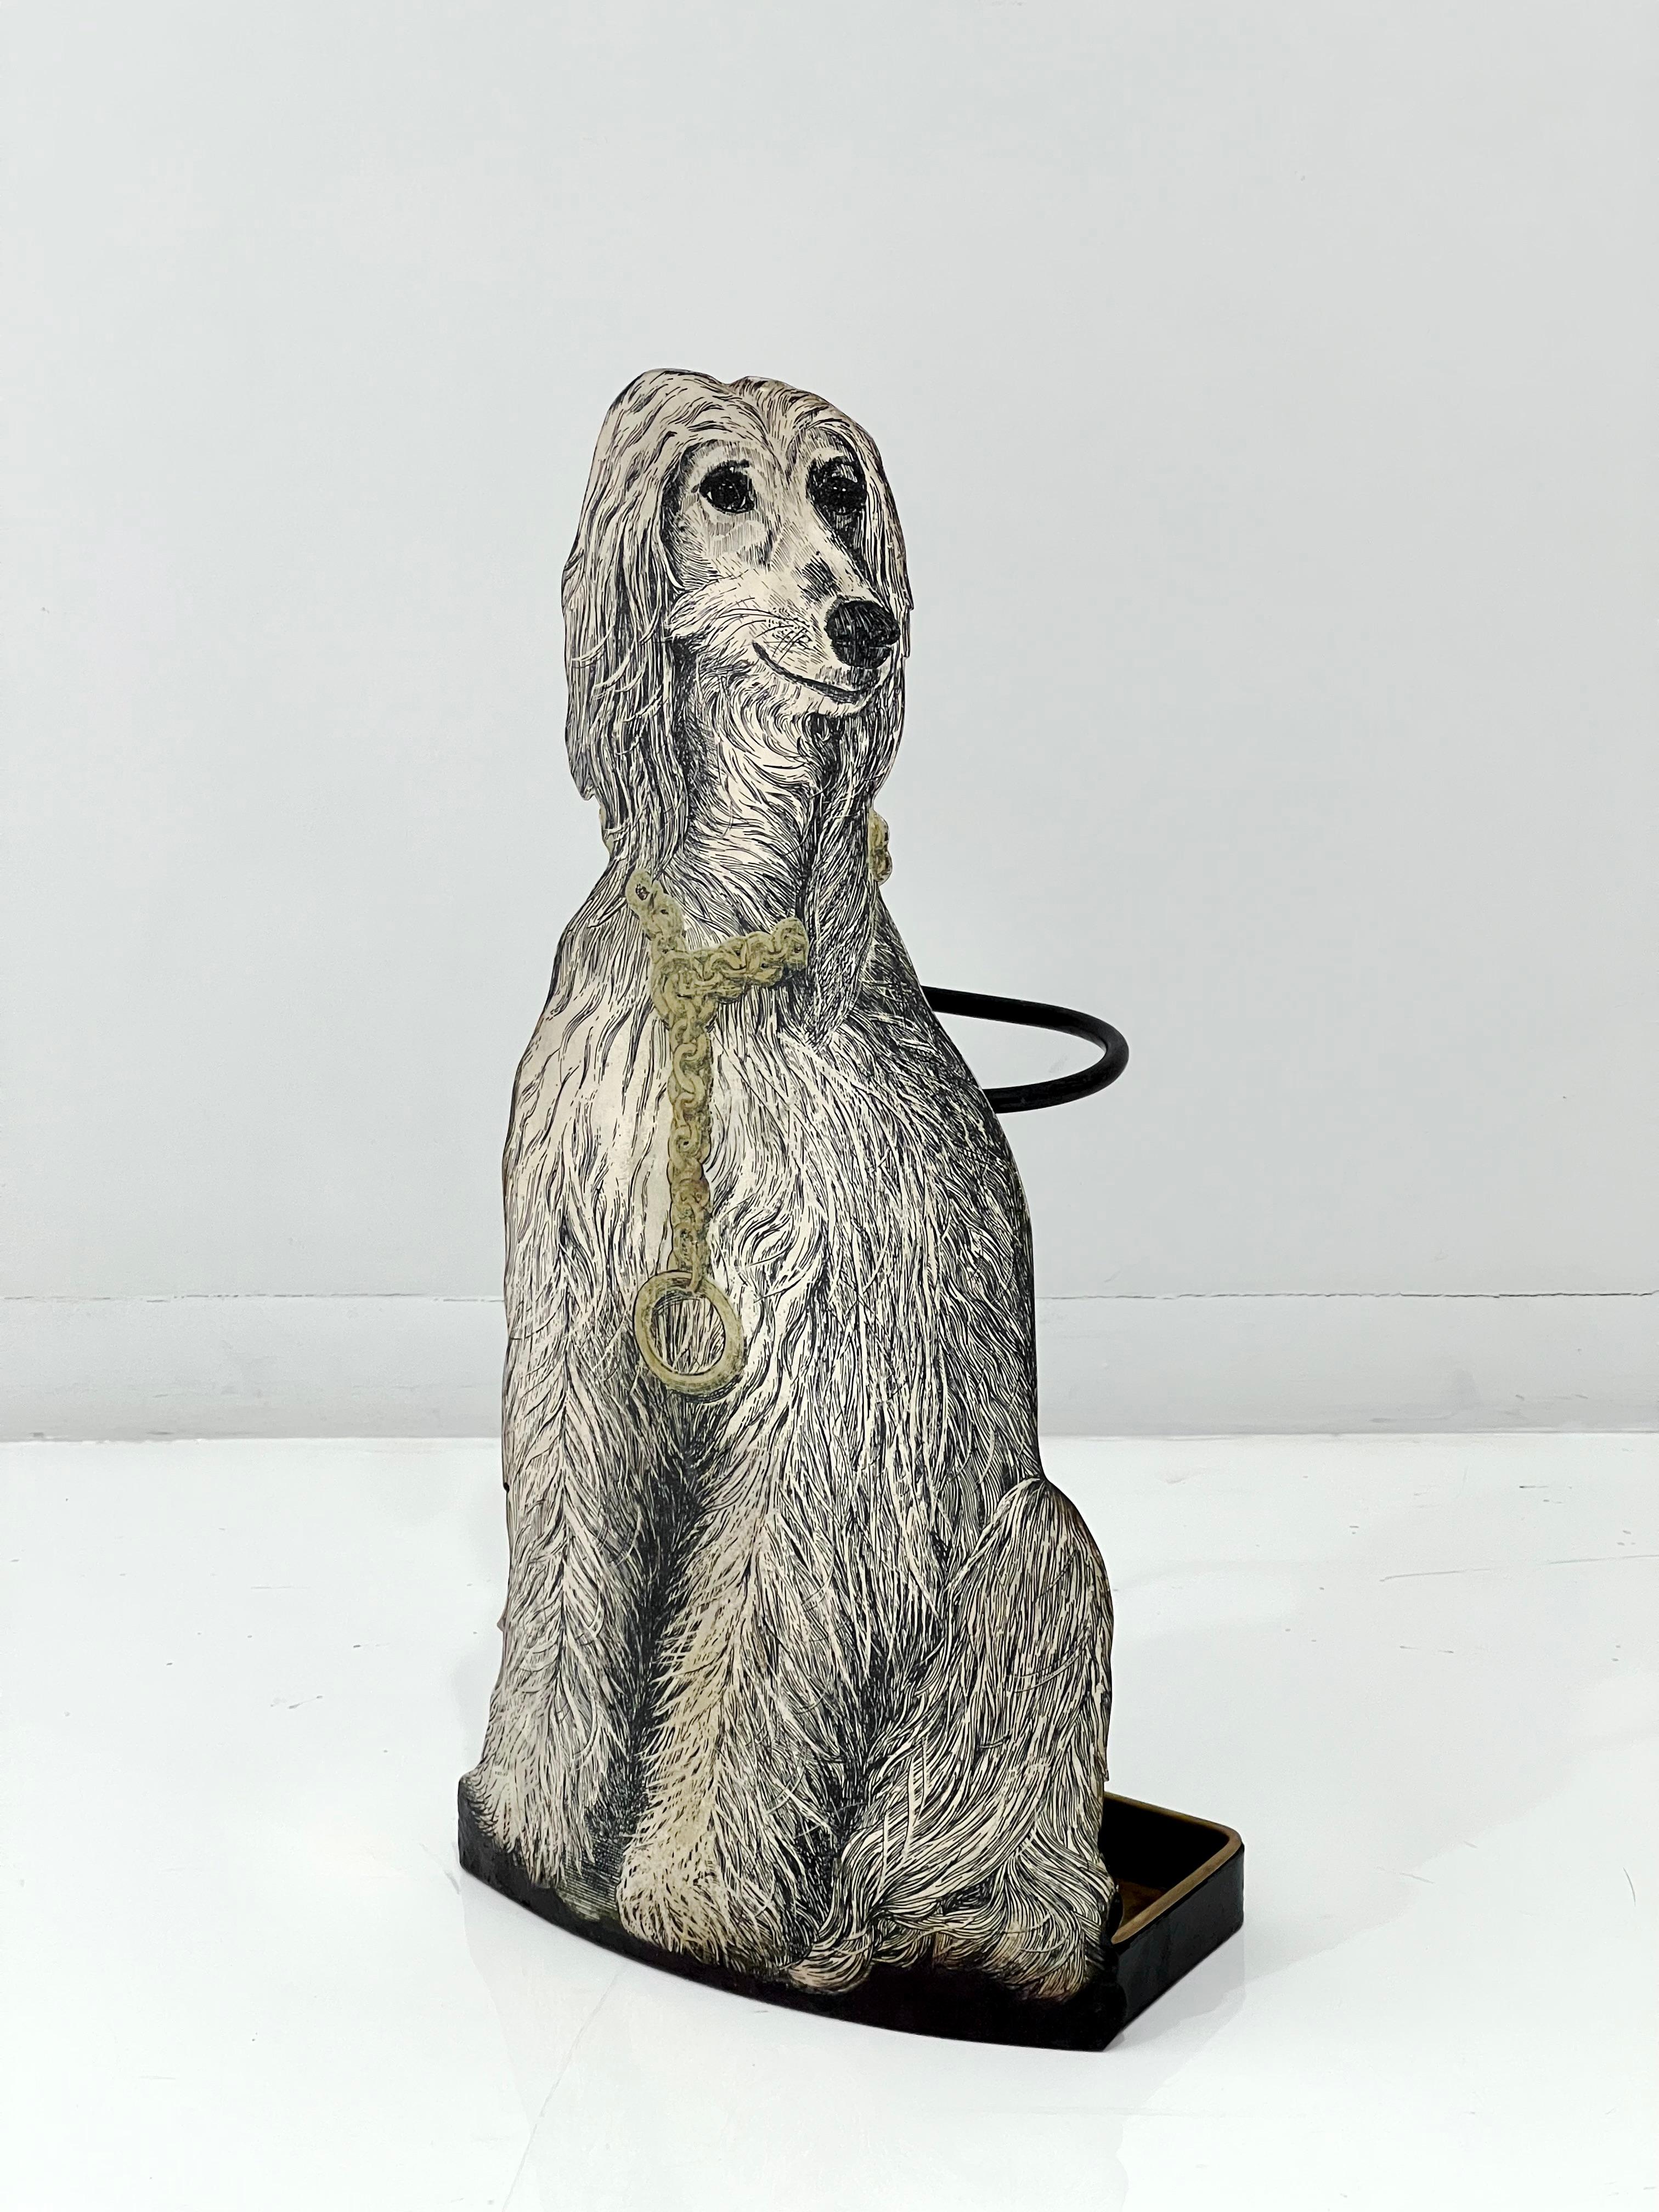 Delightful Piero Fornasetti umbrella stand depicting an Afghan Hound. Italy 1962, with back drip-tray.